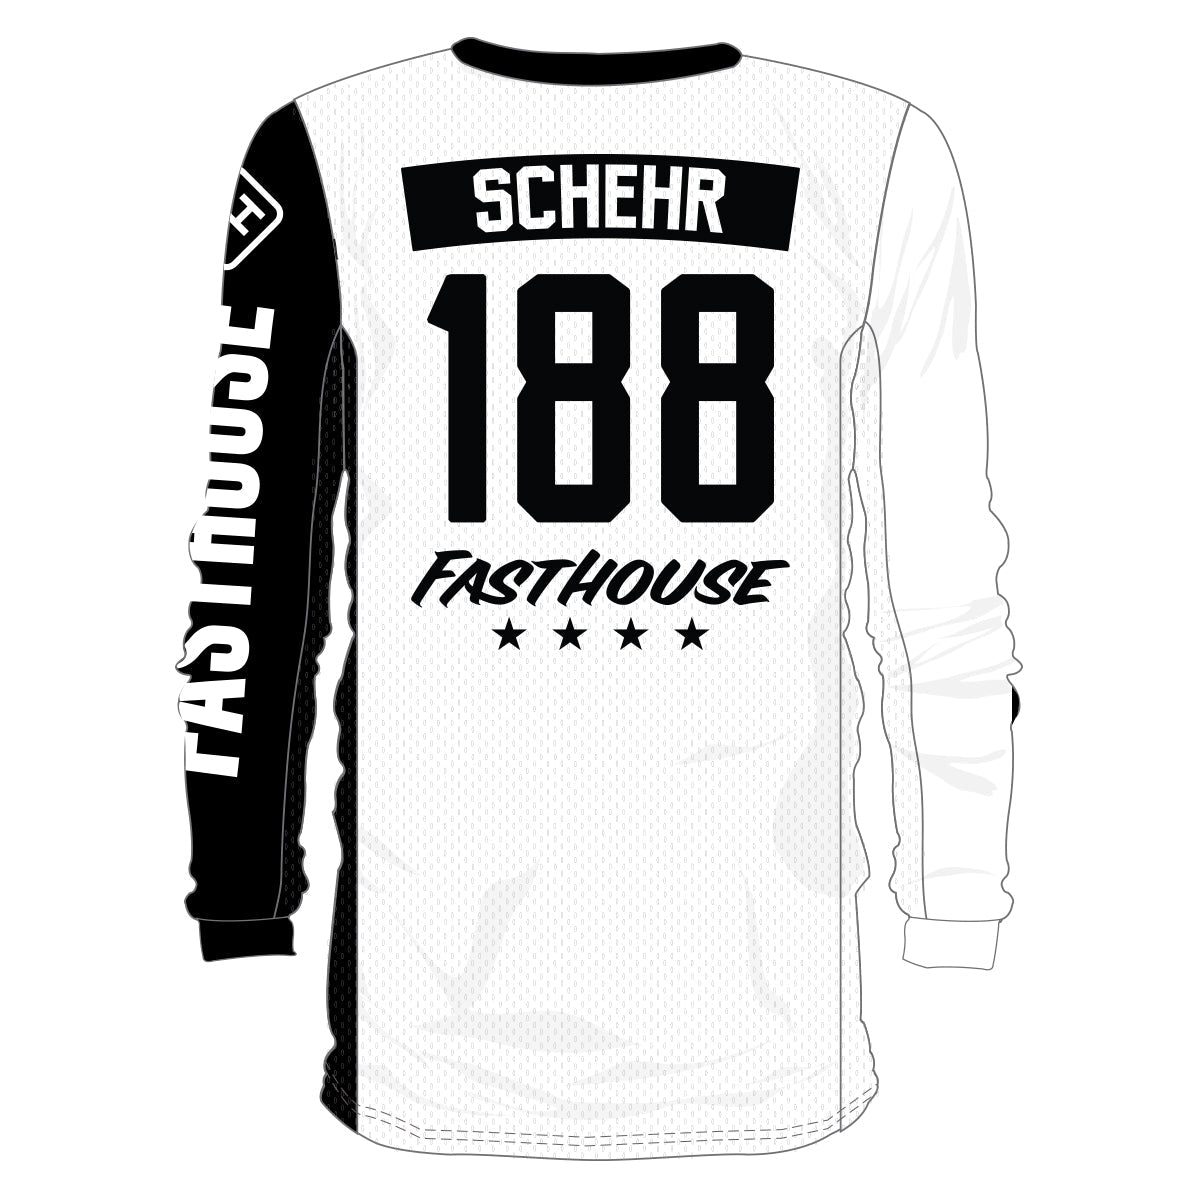 Fasthouse - Jersey ID Kit - Banner